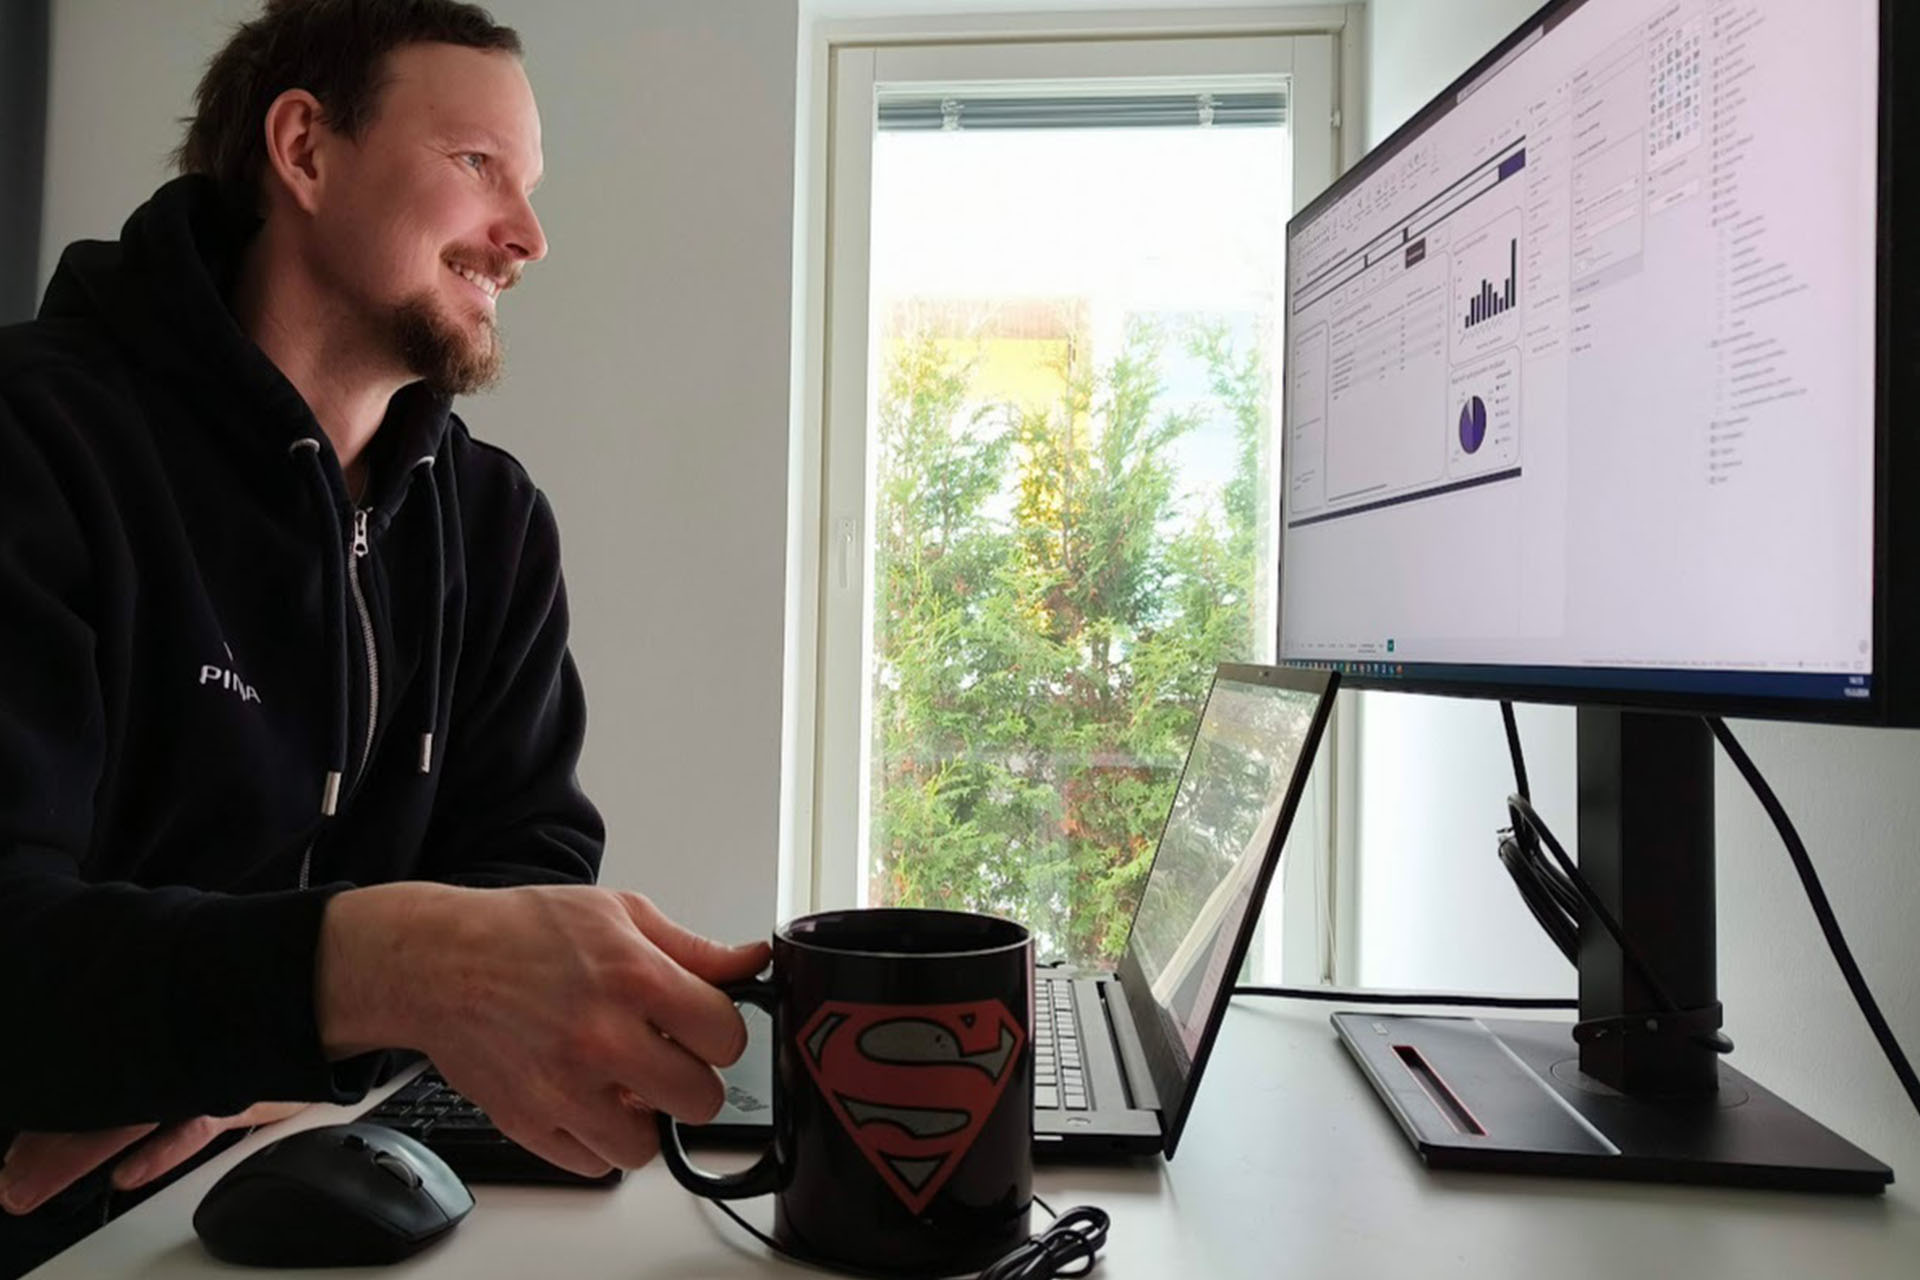 Smiling man looking at graphs on computer screen holding superman coffee cup